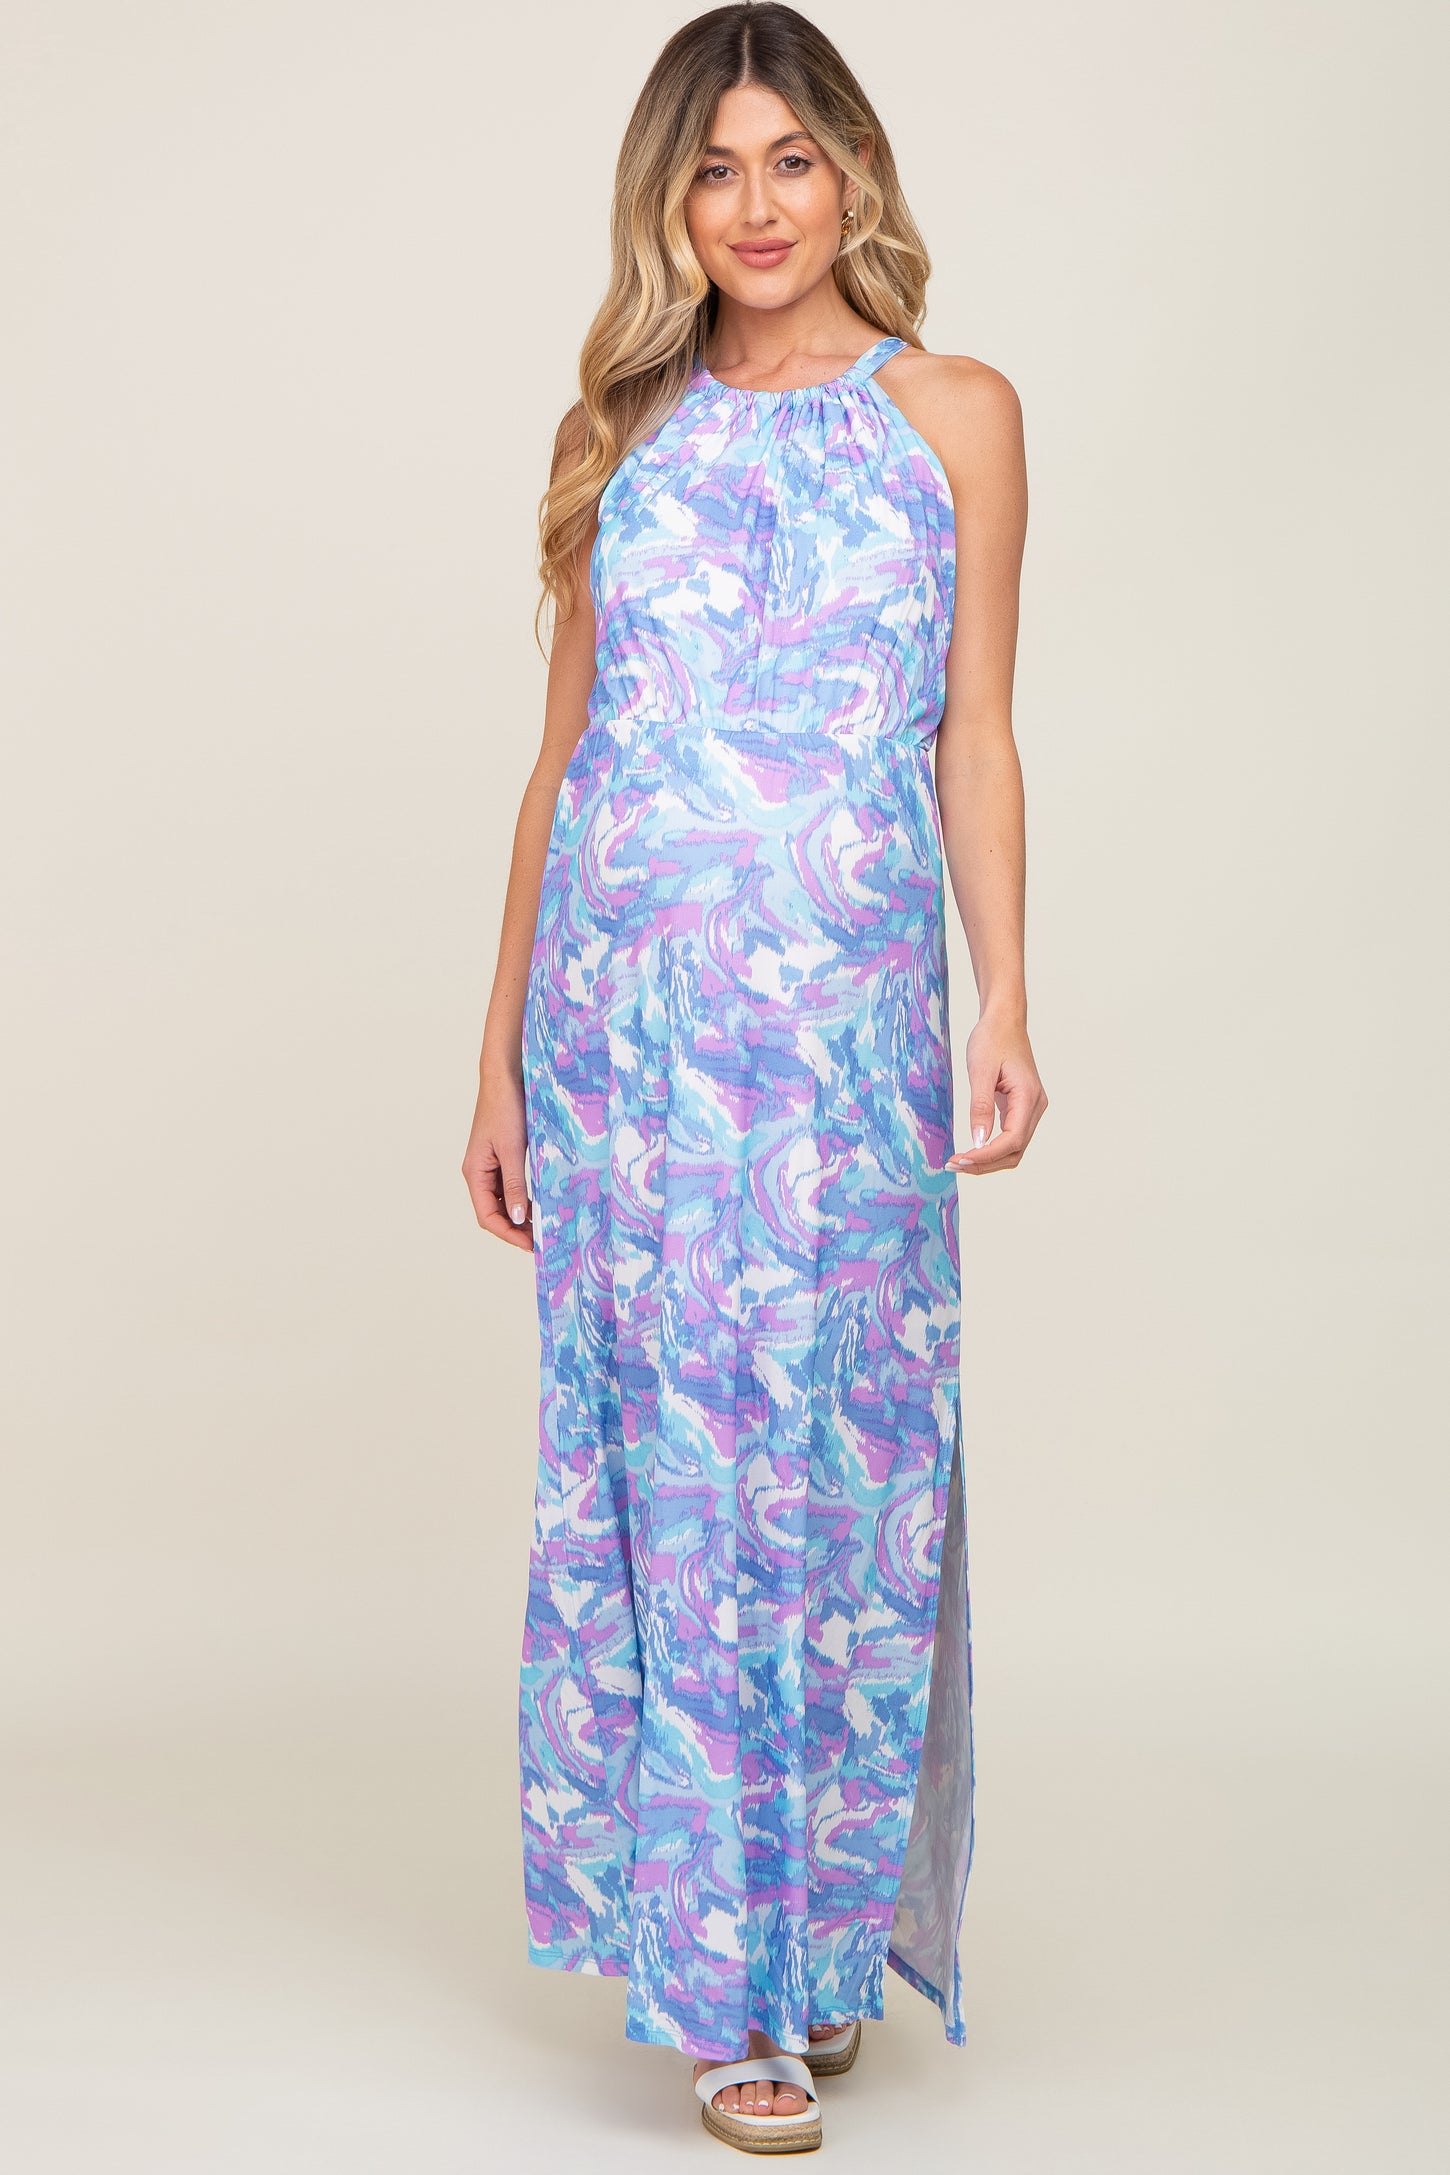 Pink Floral Square Neck Ruffle Layered Maternity Maxi Dress